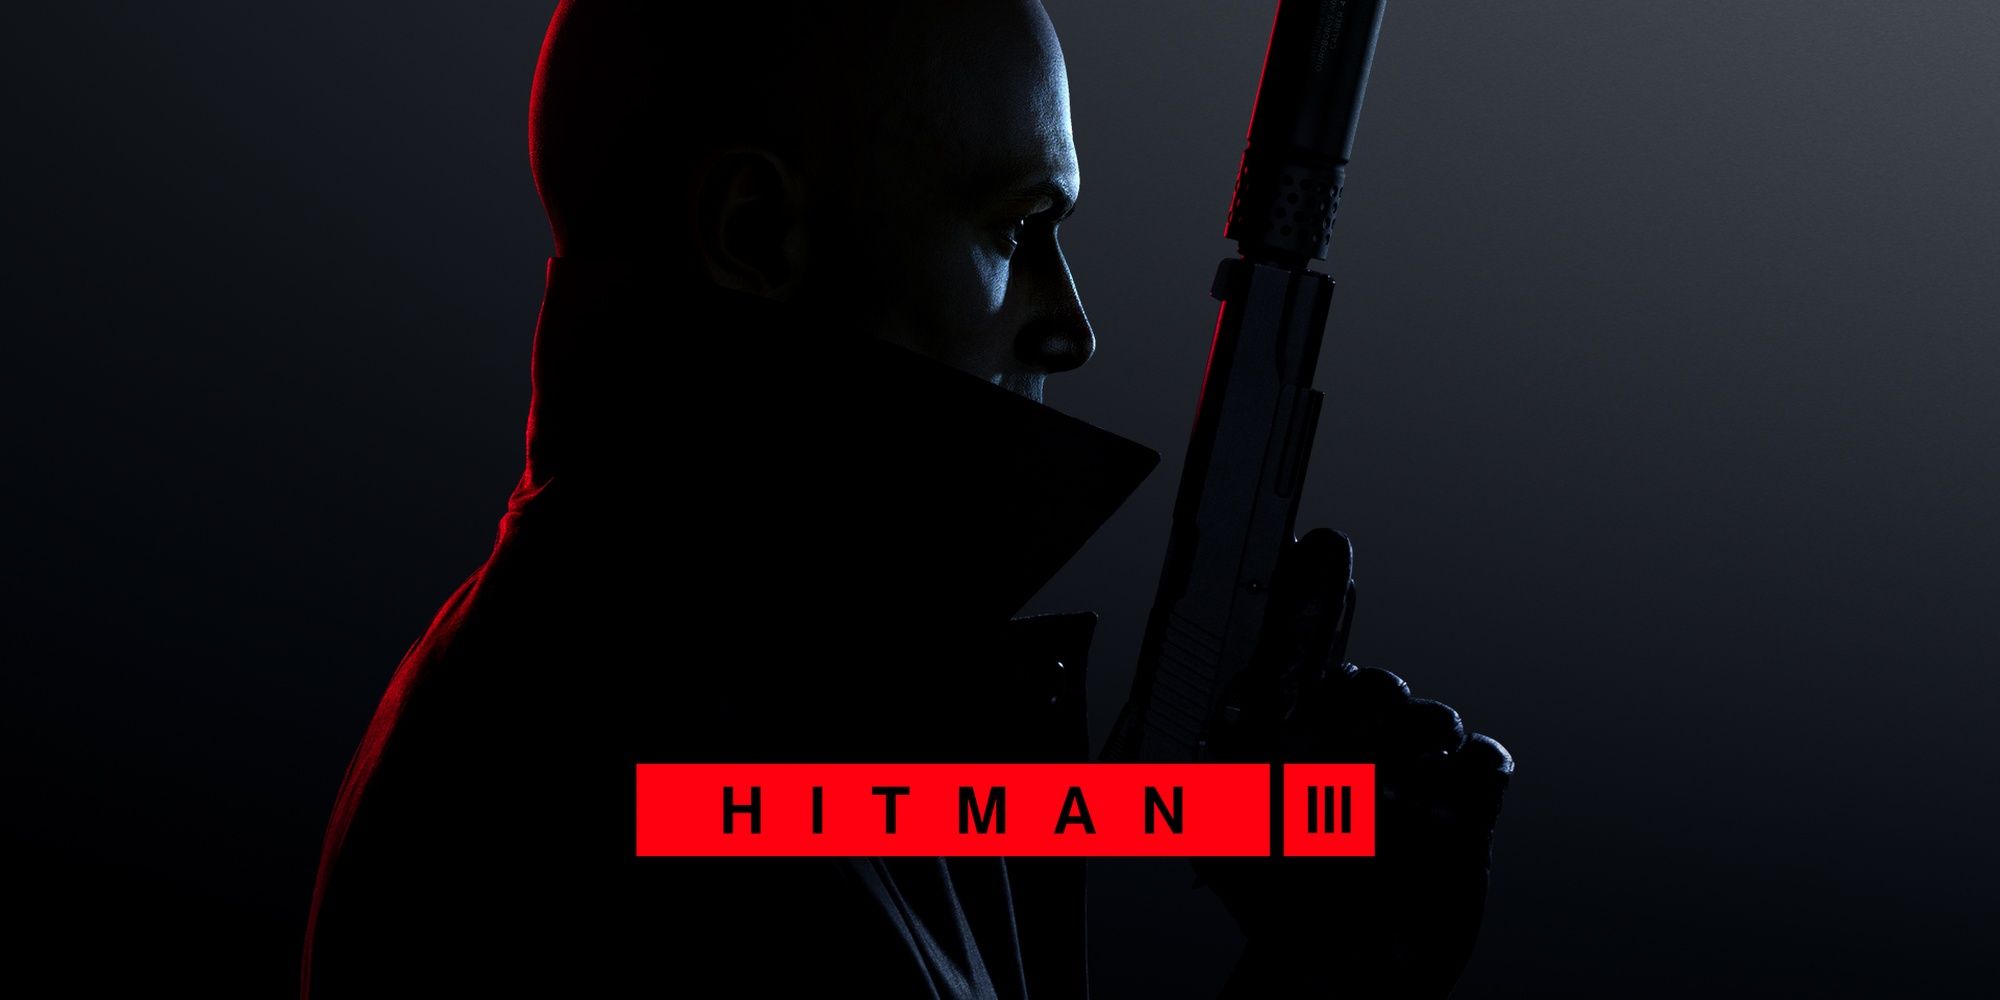 Hitman 3 Logo In Red Over Agent 46 Side Profile With Pistol Raised